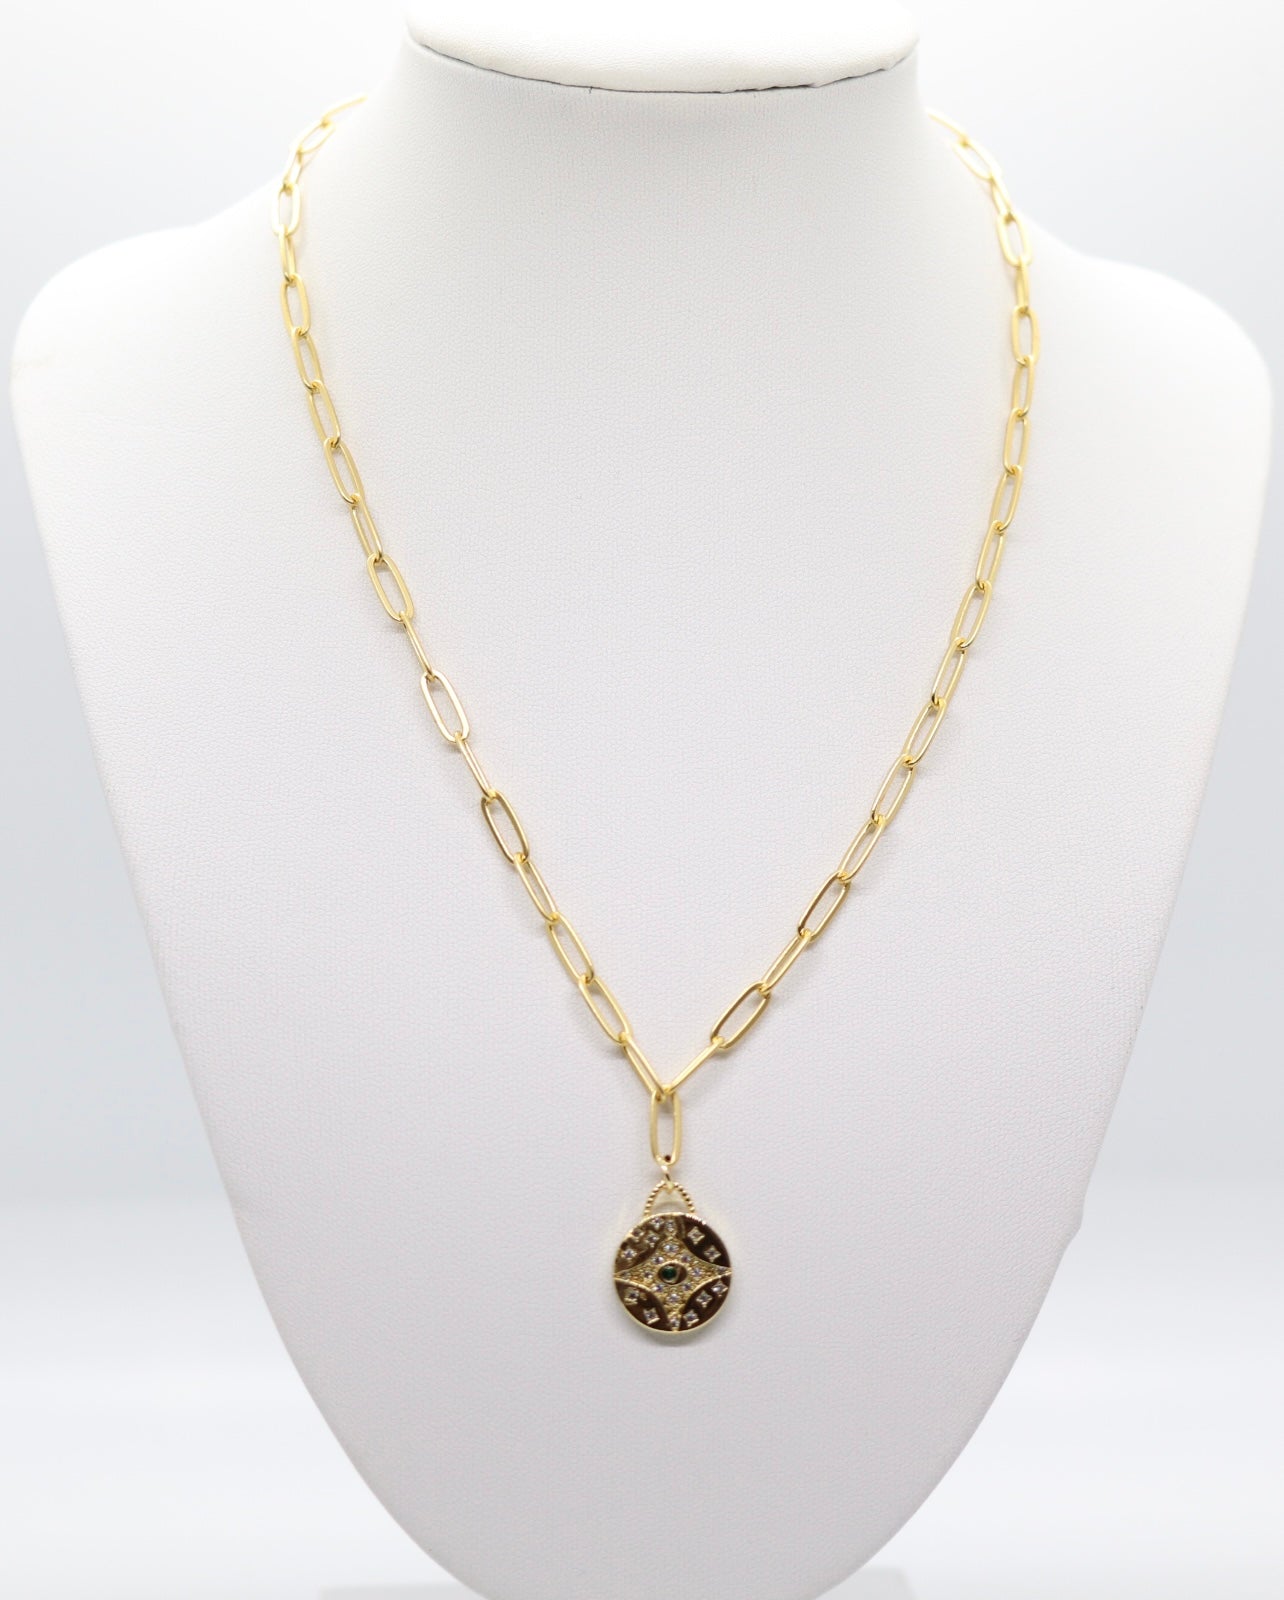 Gold 3.8mm Link Chain with Gold Star Pendant - 18 inches